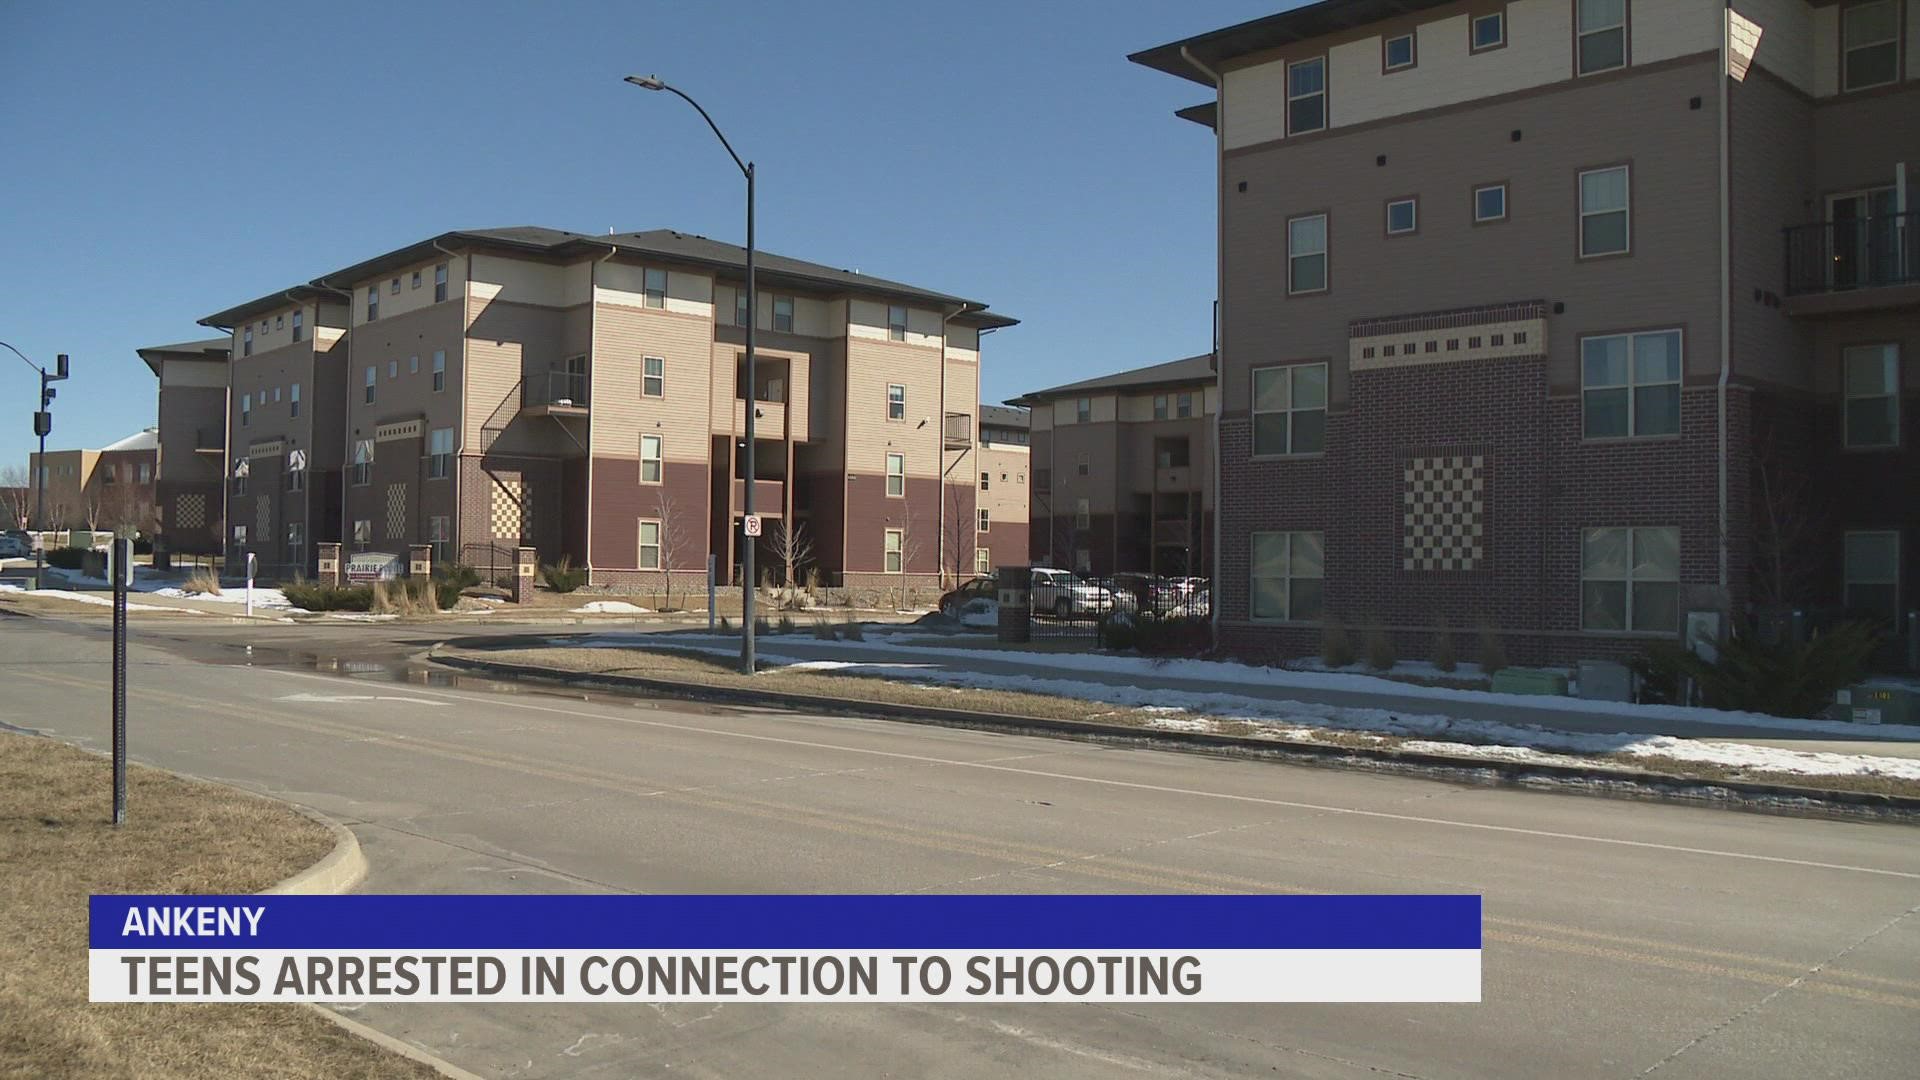 One of the teenagers is facing two counts of attempted murder, one for his actions at the apartment complex and another for shooting at police.